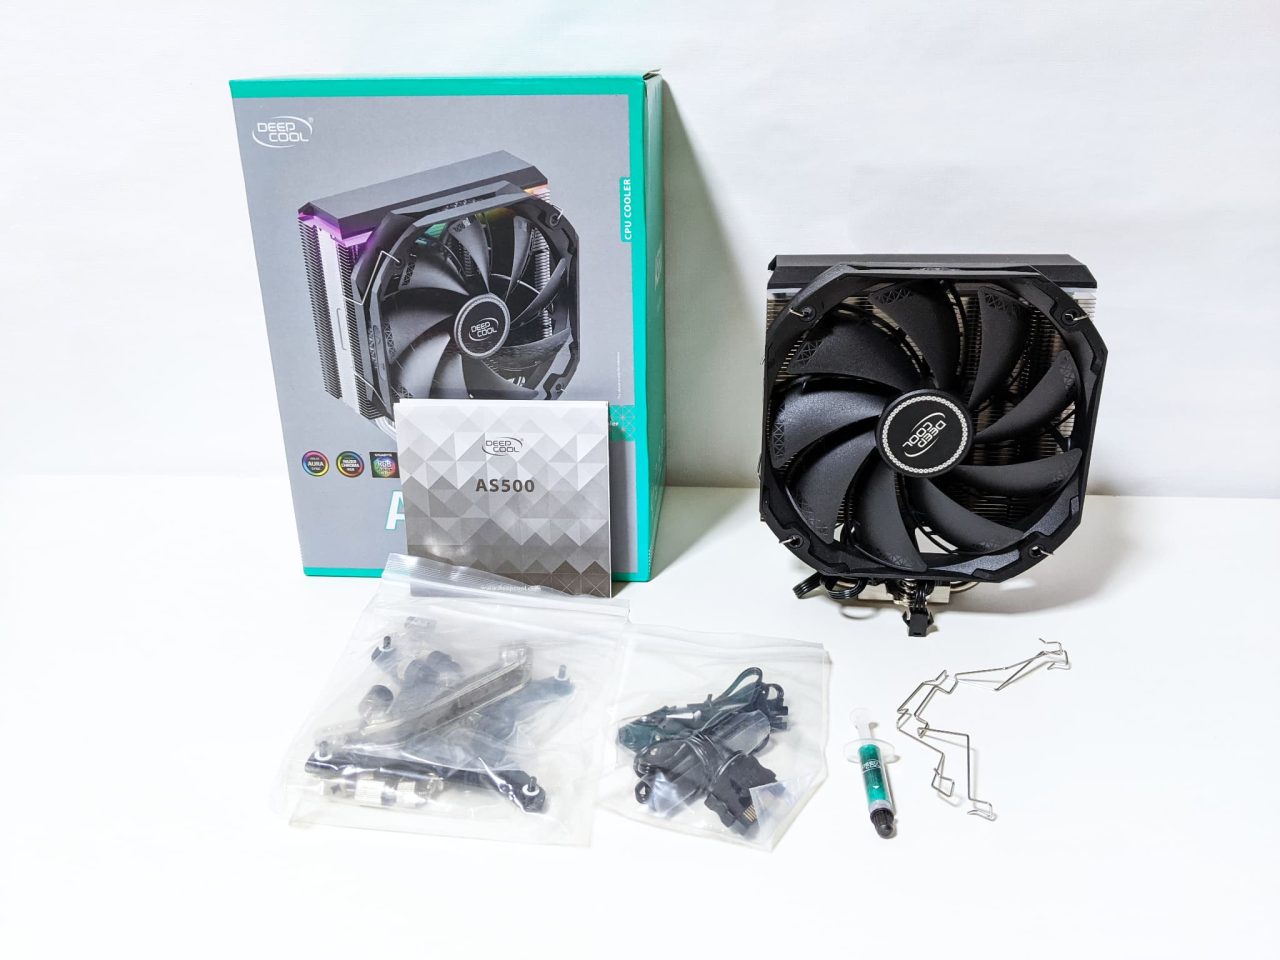 Deepcool-AS500-Review02